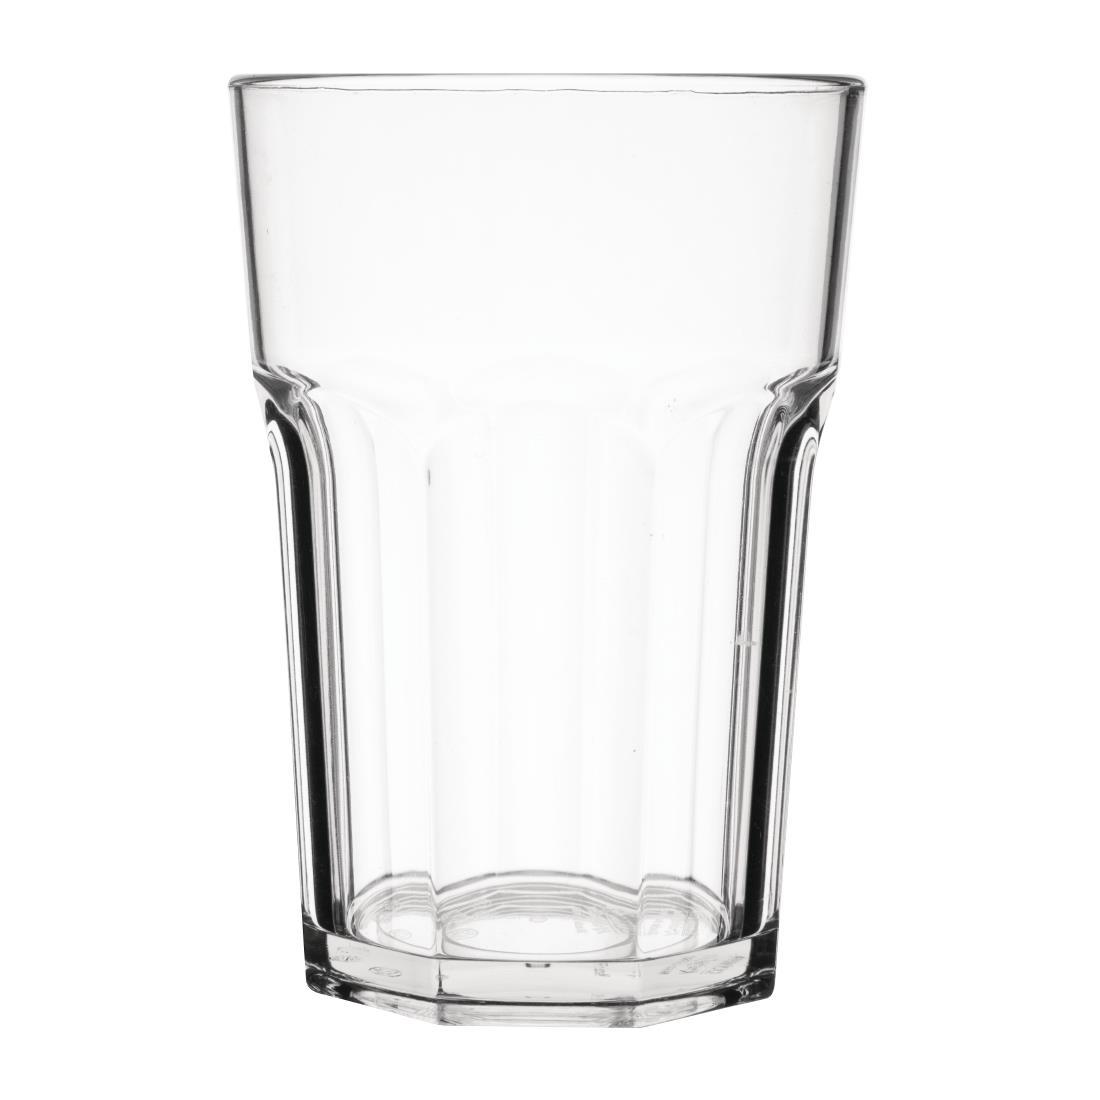 Olympia Kristallon Orleans Tumblers 390ml (Pack of 12) - DY790  - 1